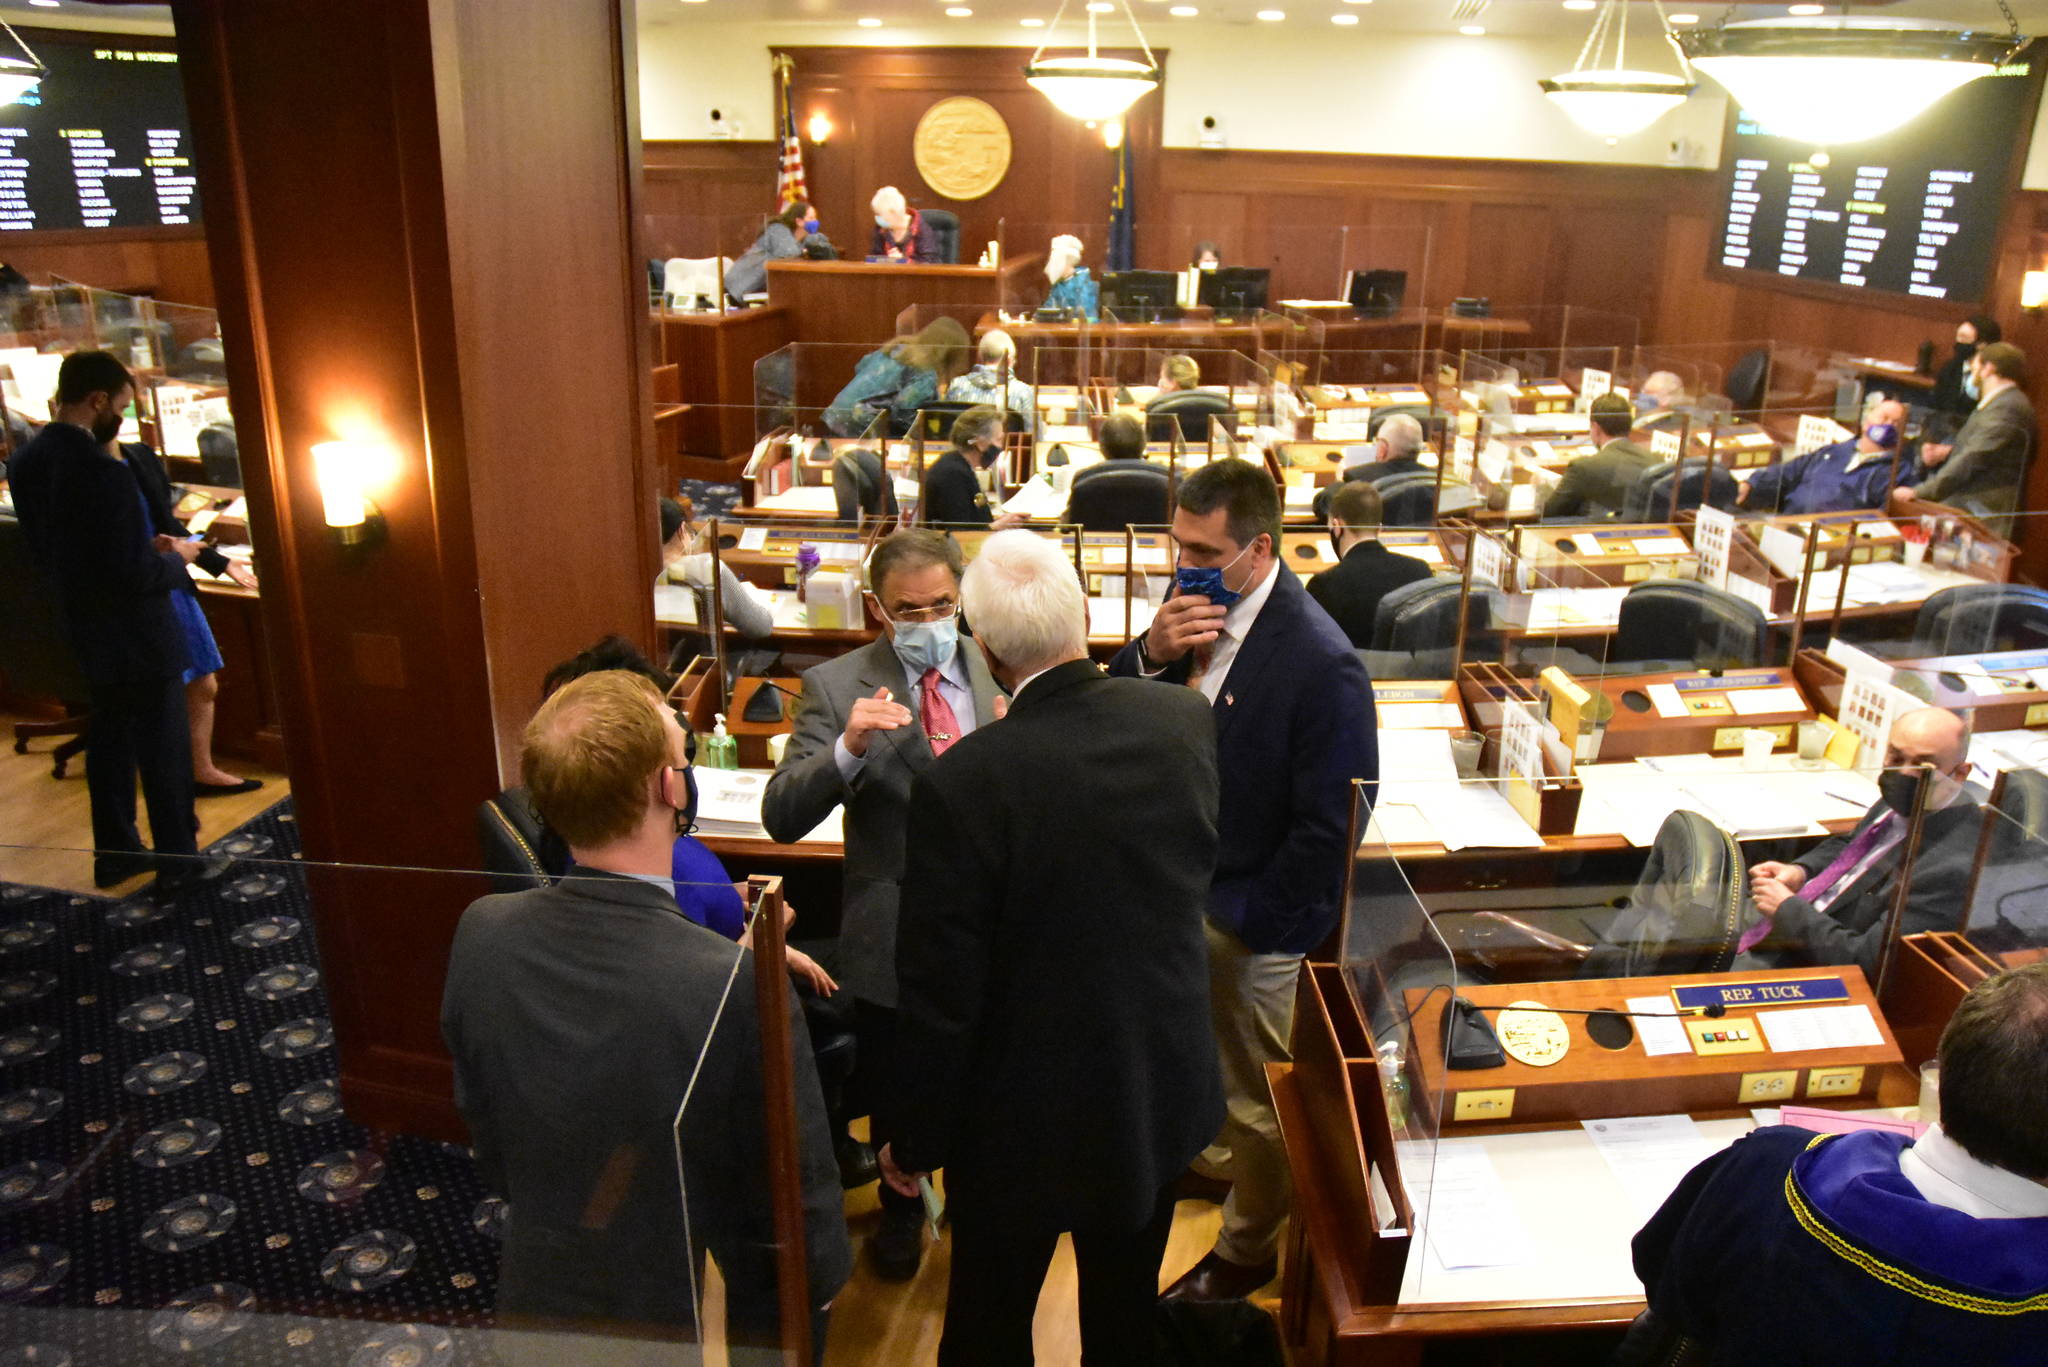 The Alaska House of Representatives, seen here on Friday, May 7, 2021, is scheduled to meet early Monday morning to finalize budget bills before the end of the legislative session in about two weeks. (Peter Segall / Juneau Empire)